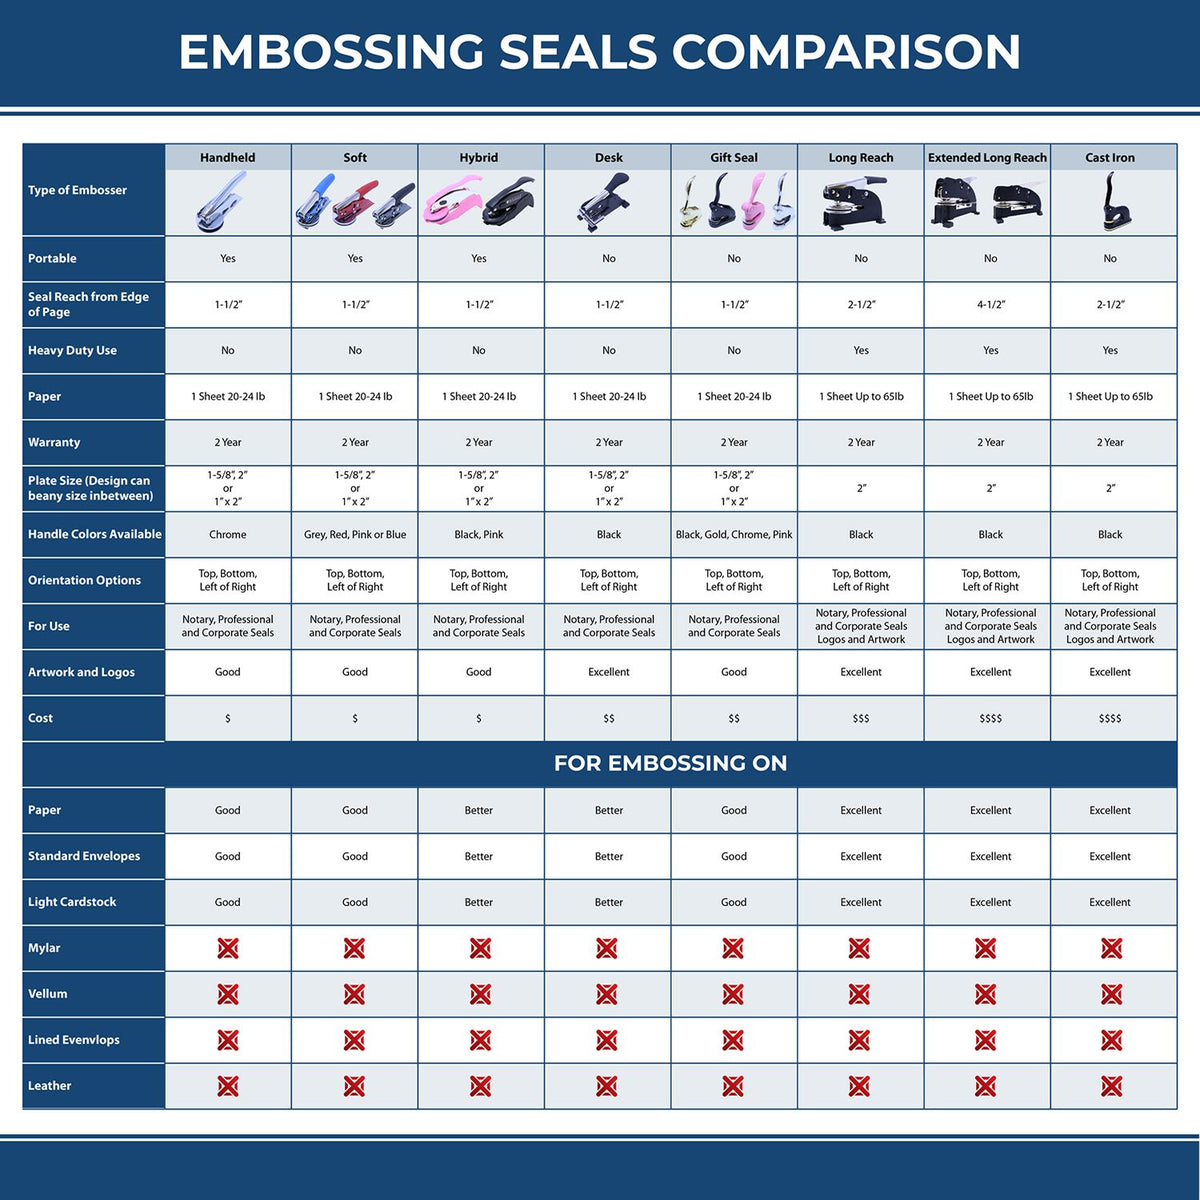 A comparison chart for the different types of mount models available for the Soft Connecticut Professional Geologist Seal